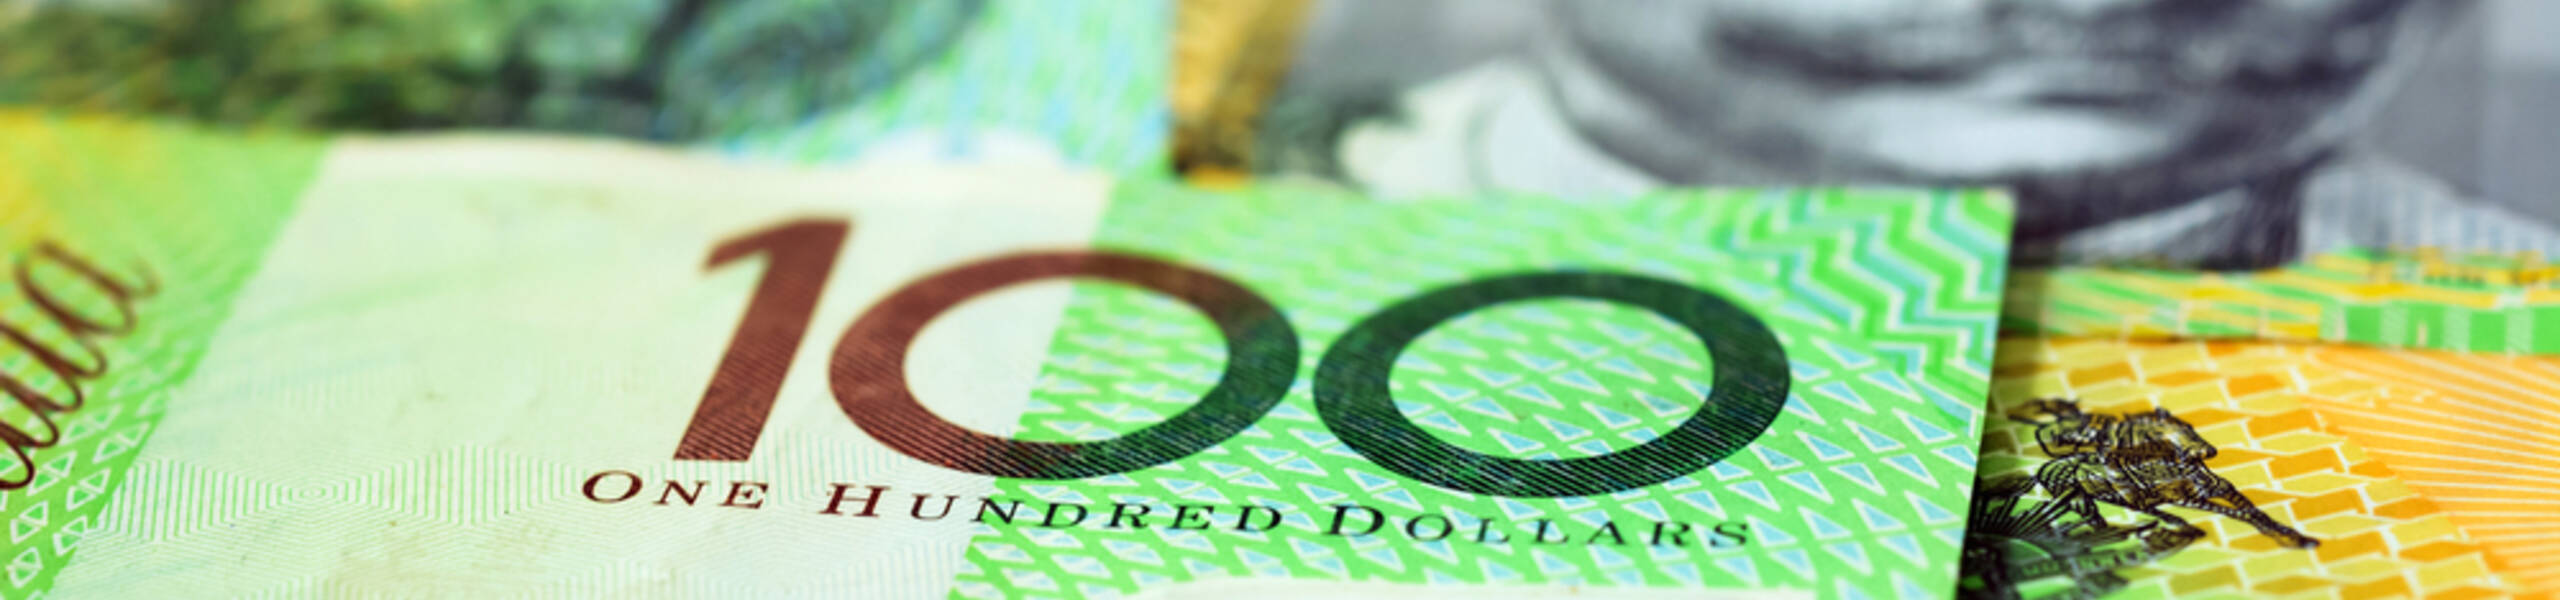 AUD/CAD can get higher